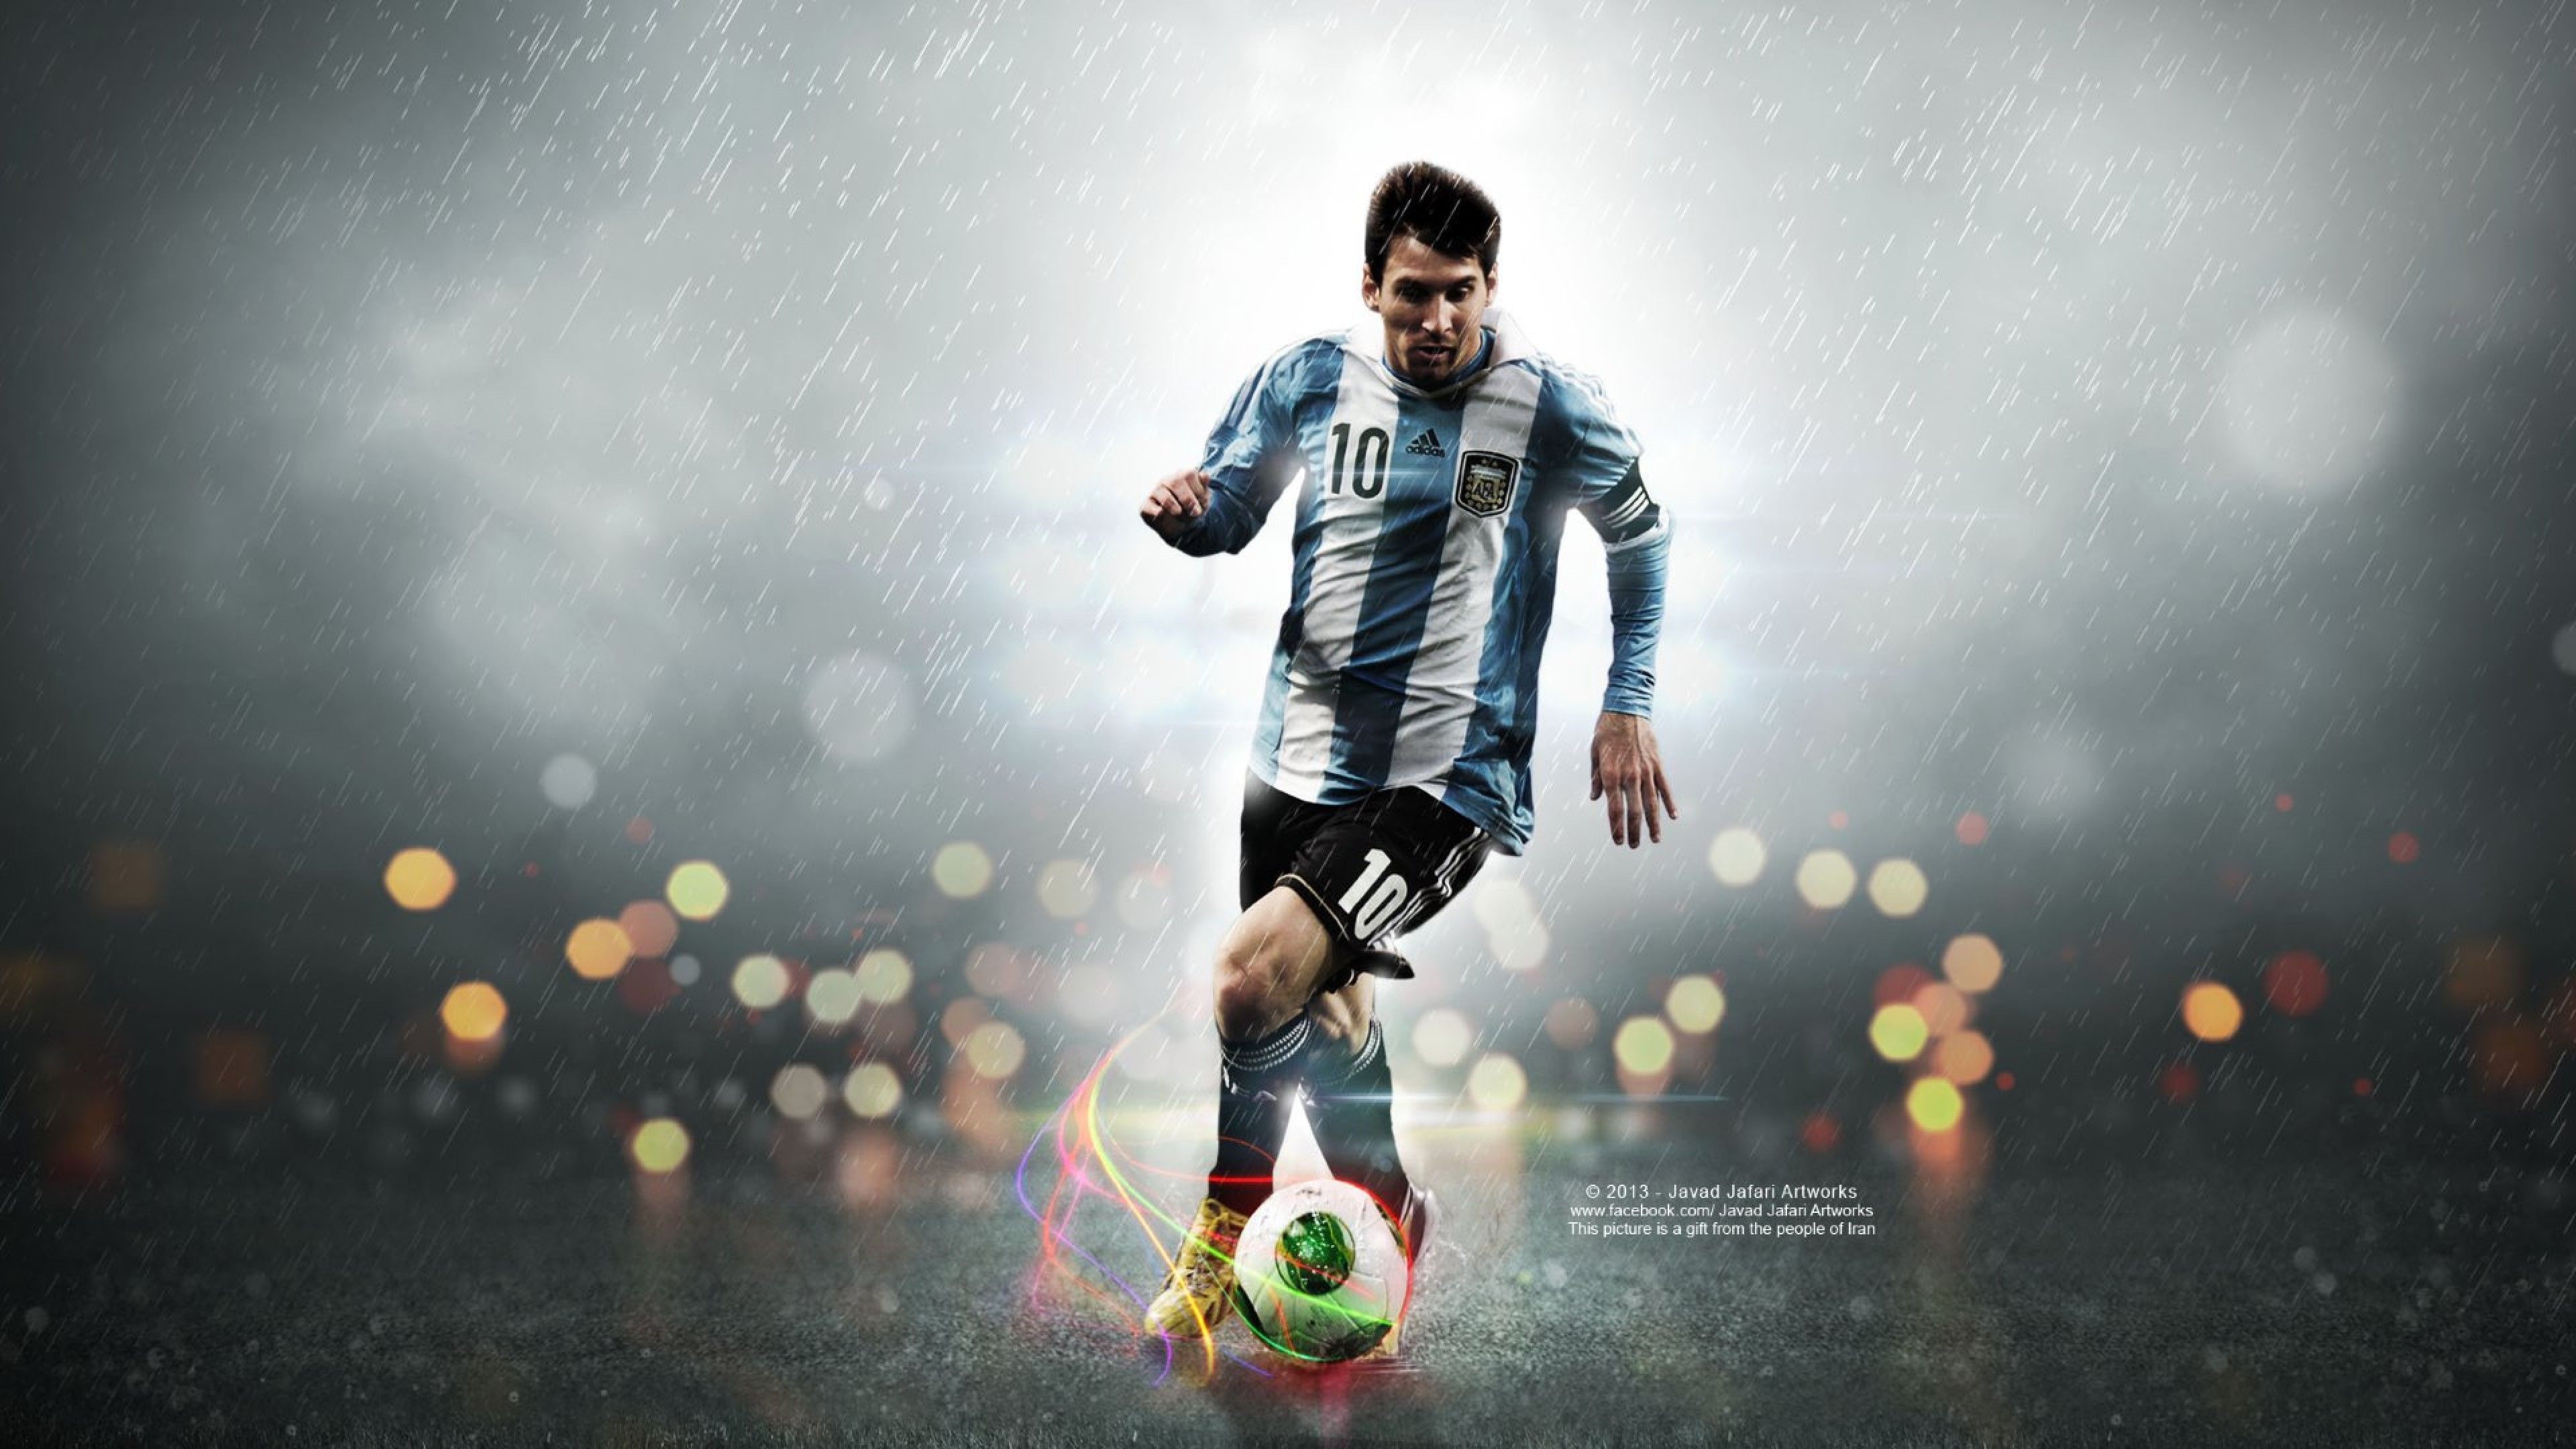 Free Download Lionel Messi HD Wallpaper for Desktop and Mobiles 4K Ultra HD